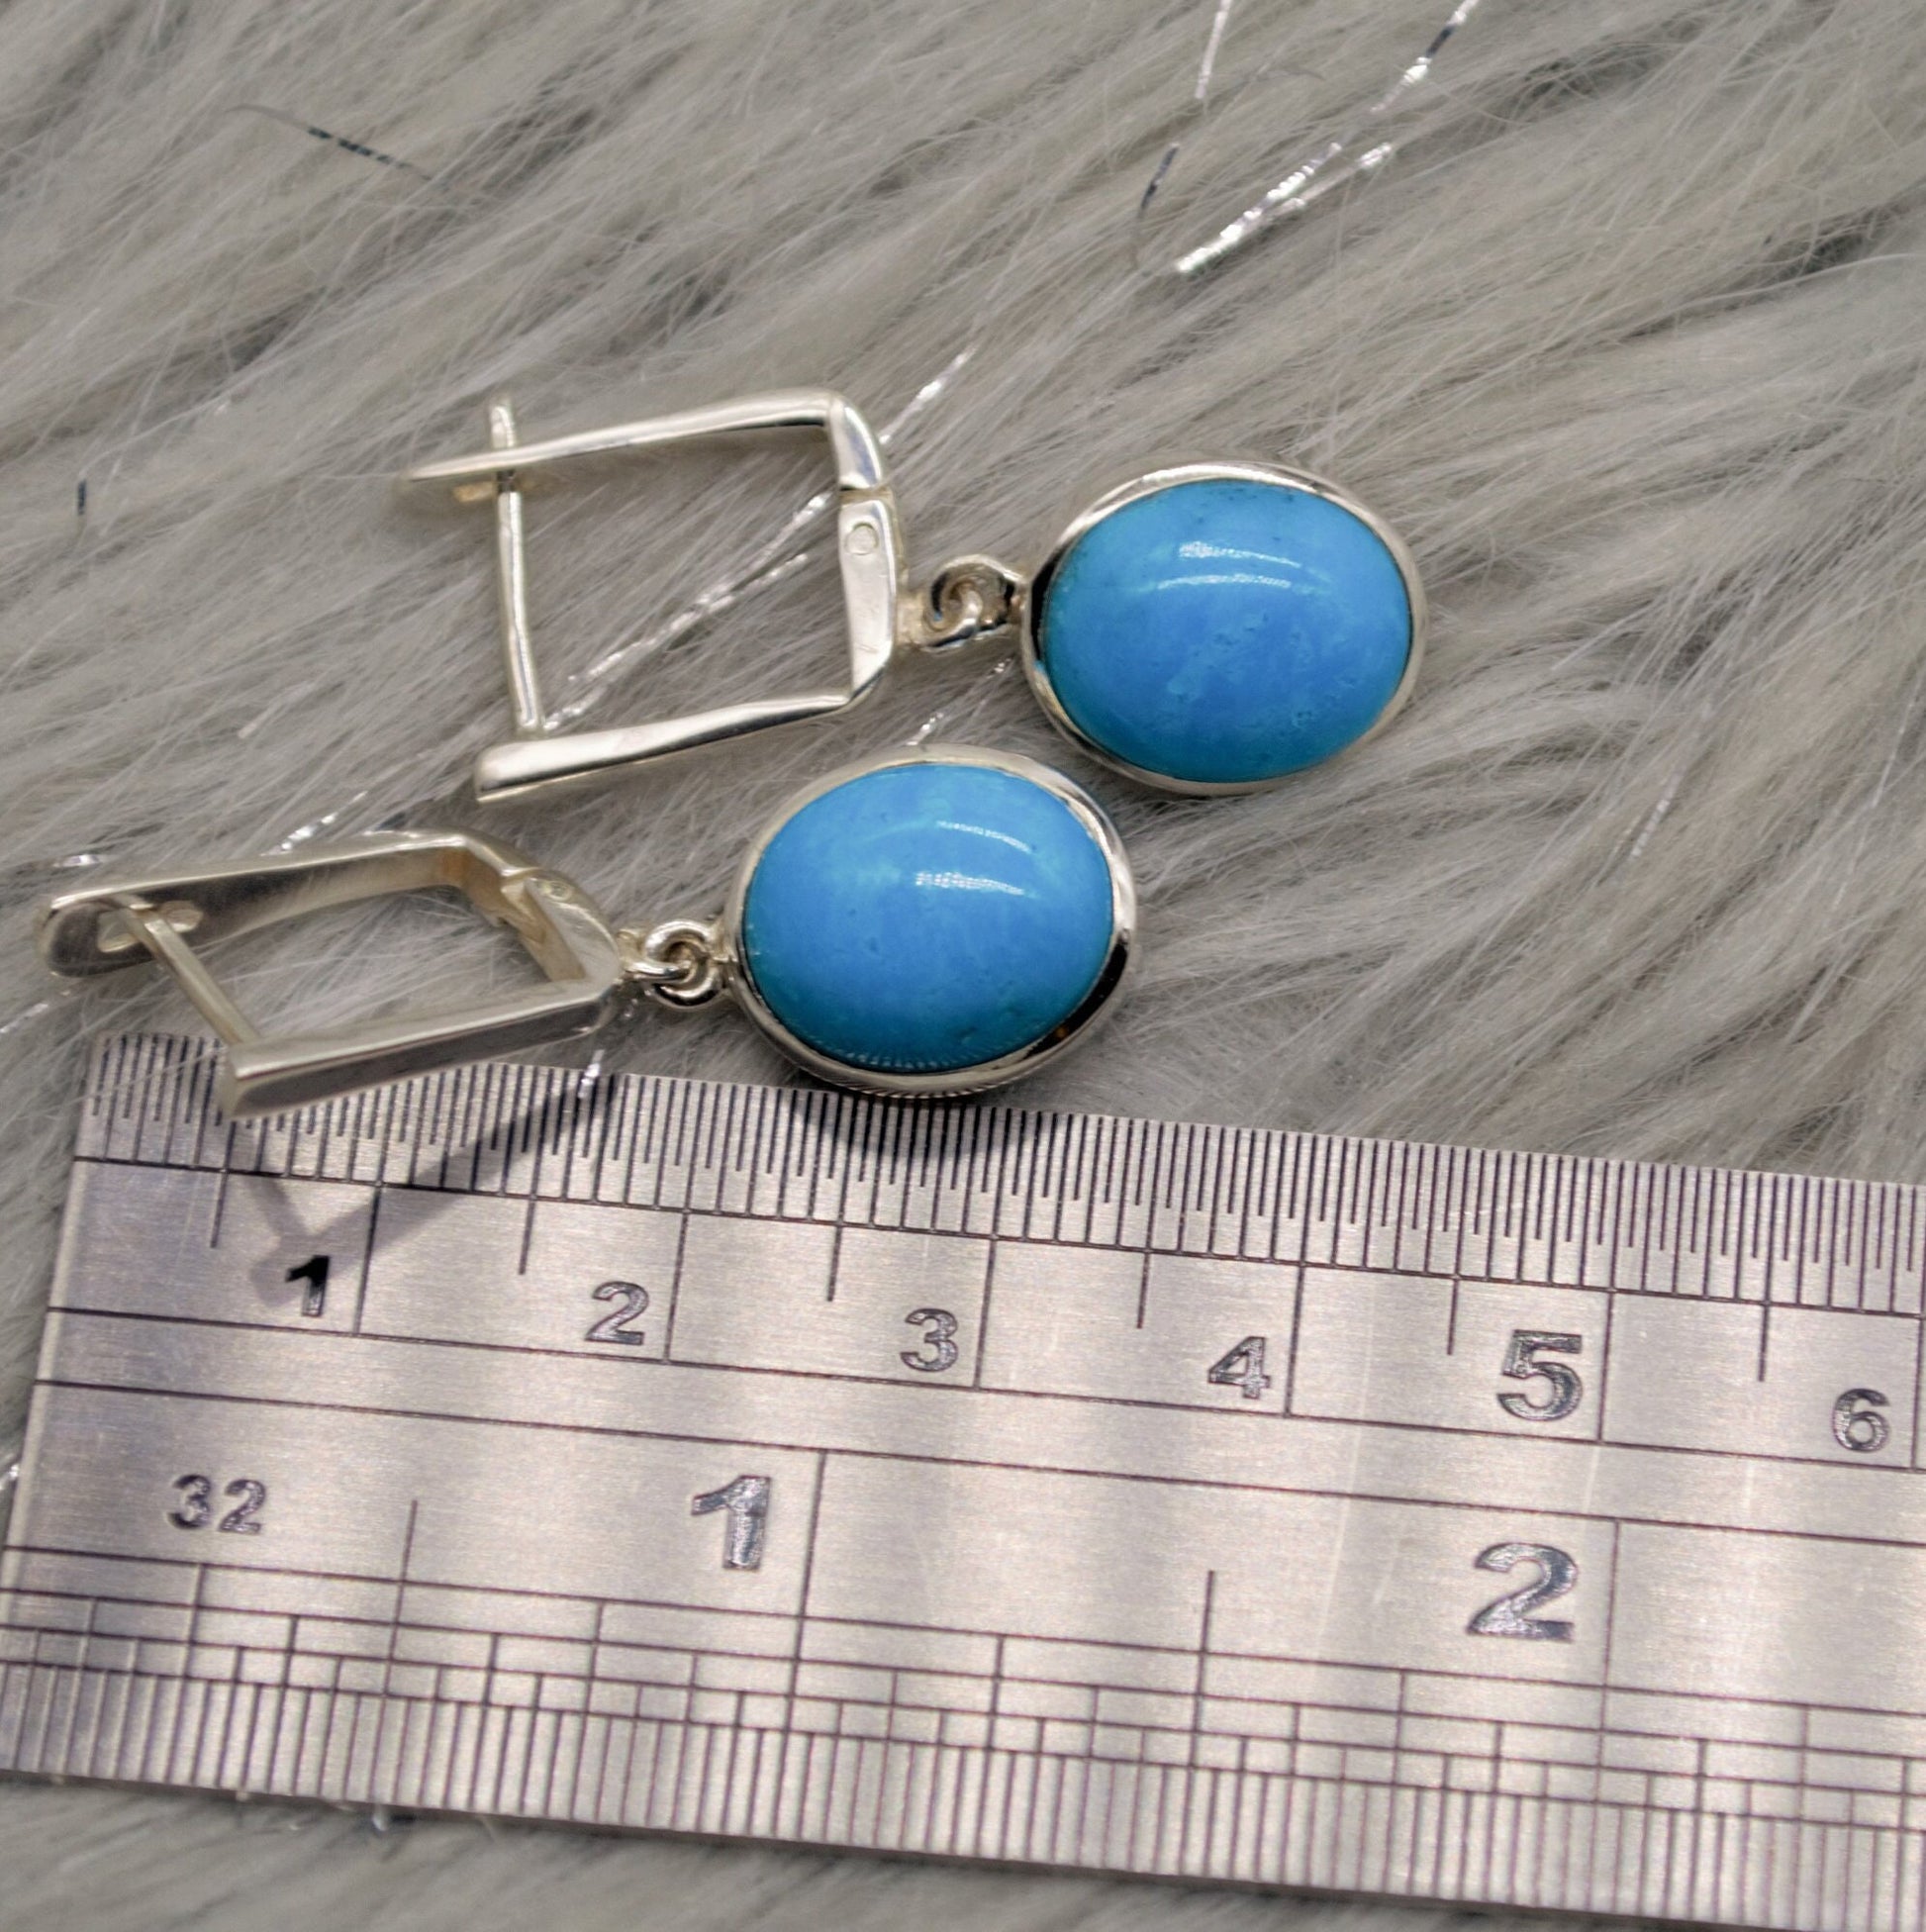 Blue Turquoise Drop Earrings, Sterling Silver Turquoise Jewelry, December Birthstone, Unique Gemstone, Christmas Gifts, Dangle Earrings